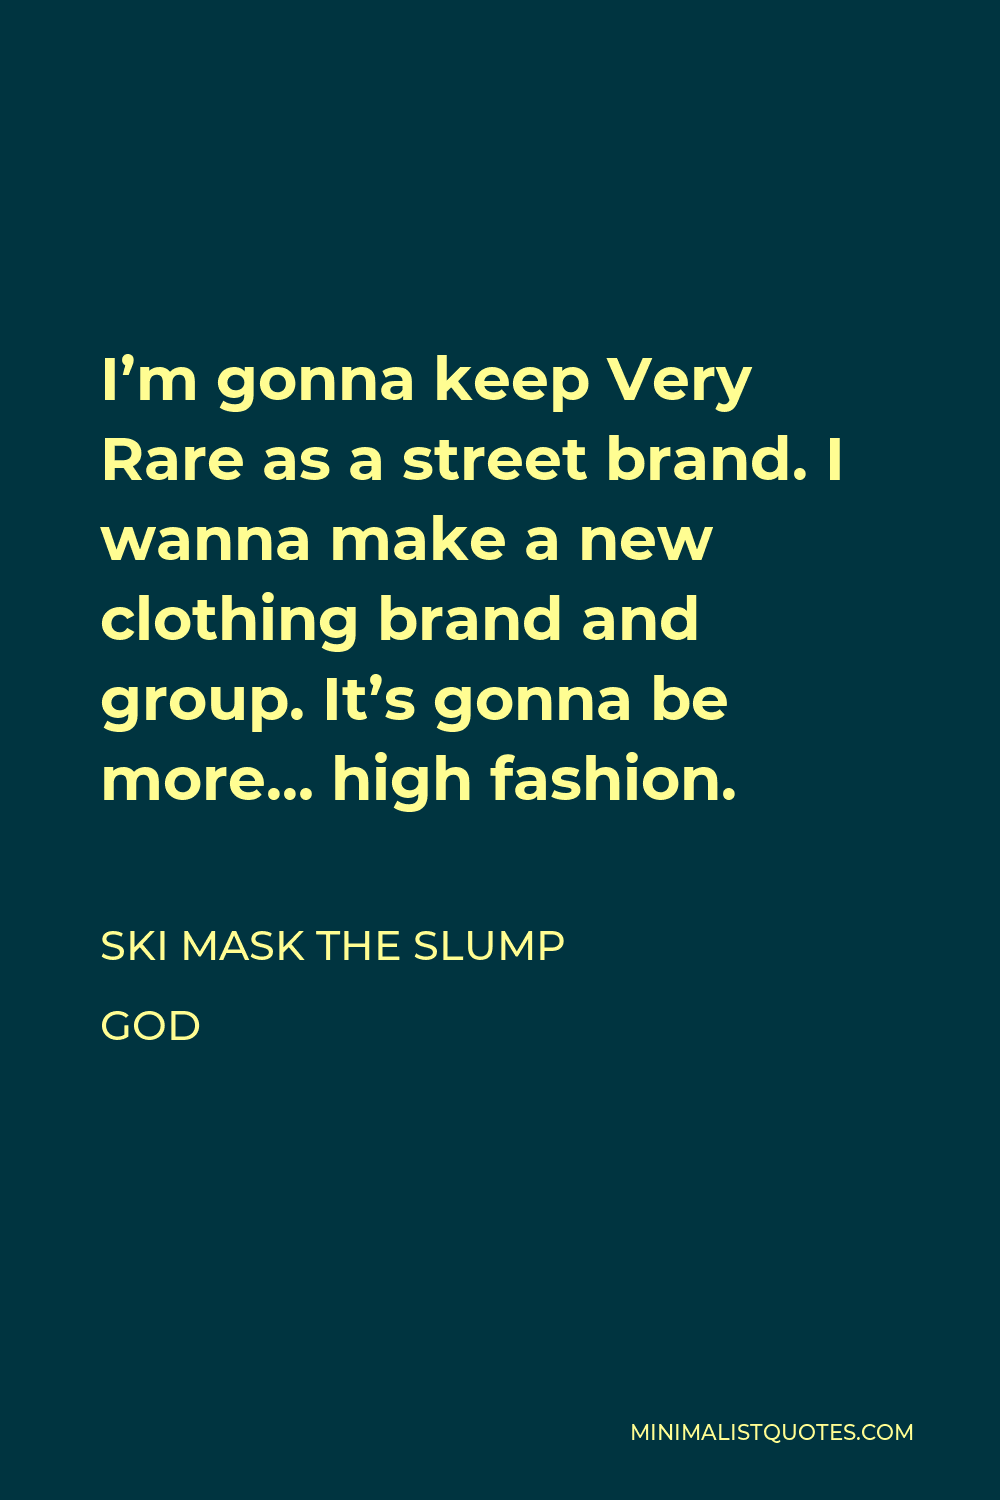 Ski Mask the Slump God Quote - I’m gonna keep Very Rare as a street brand. I wanna make a new clothing brand and group. It’s gonna be more… high fashion.